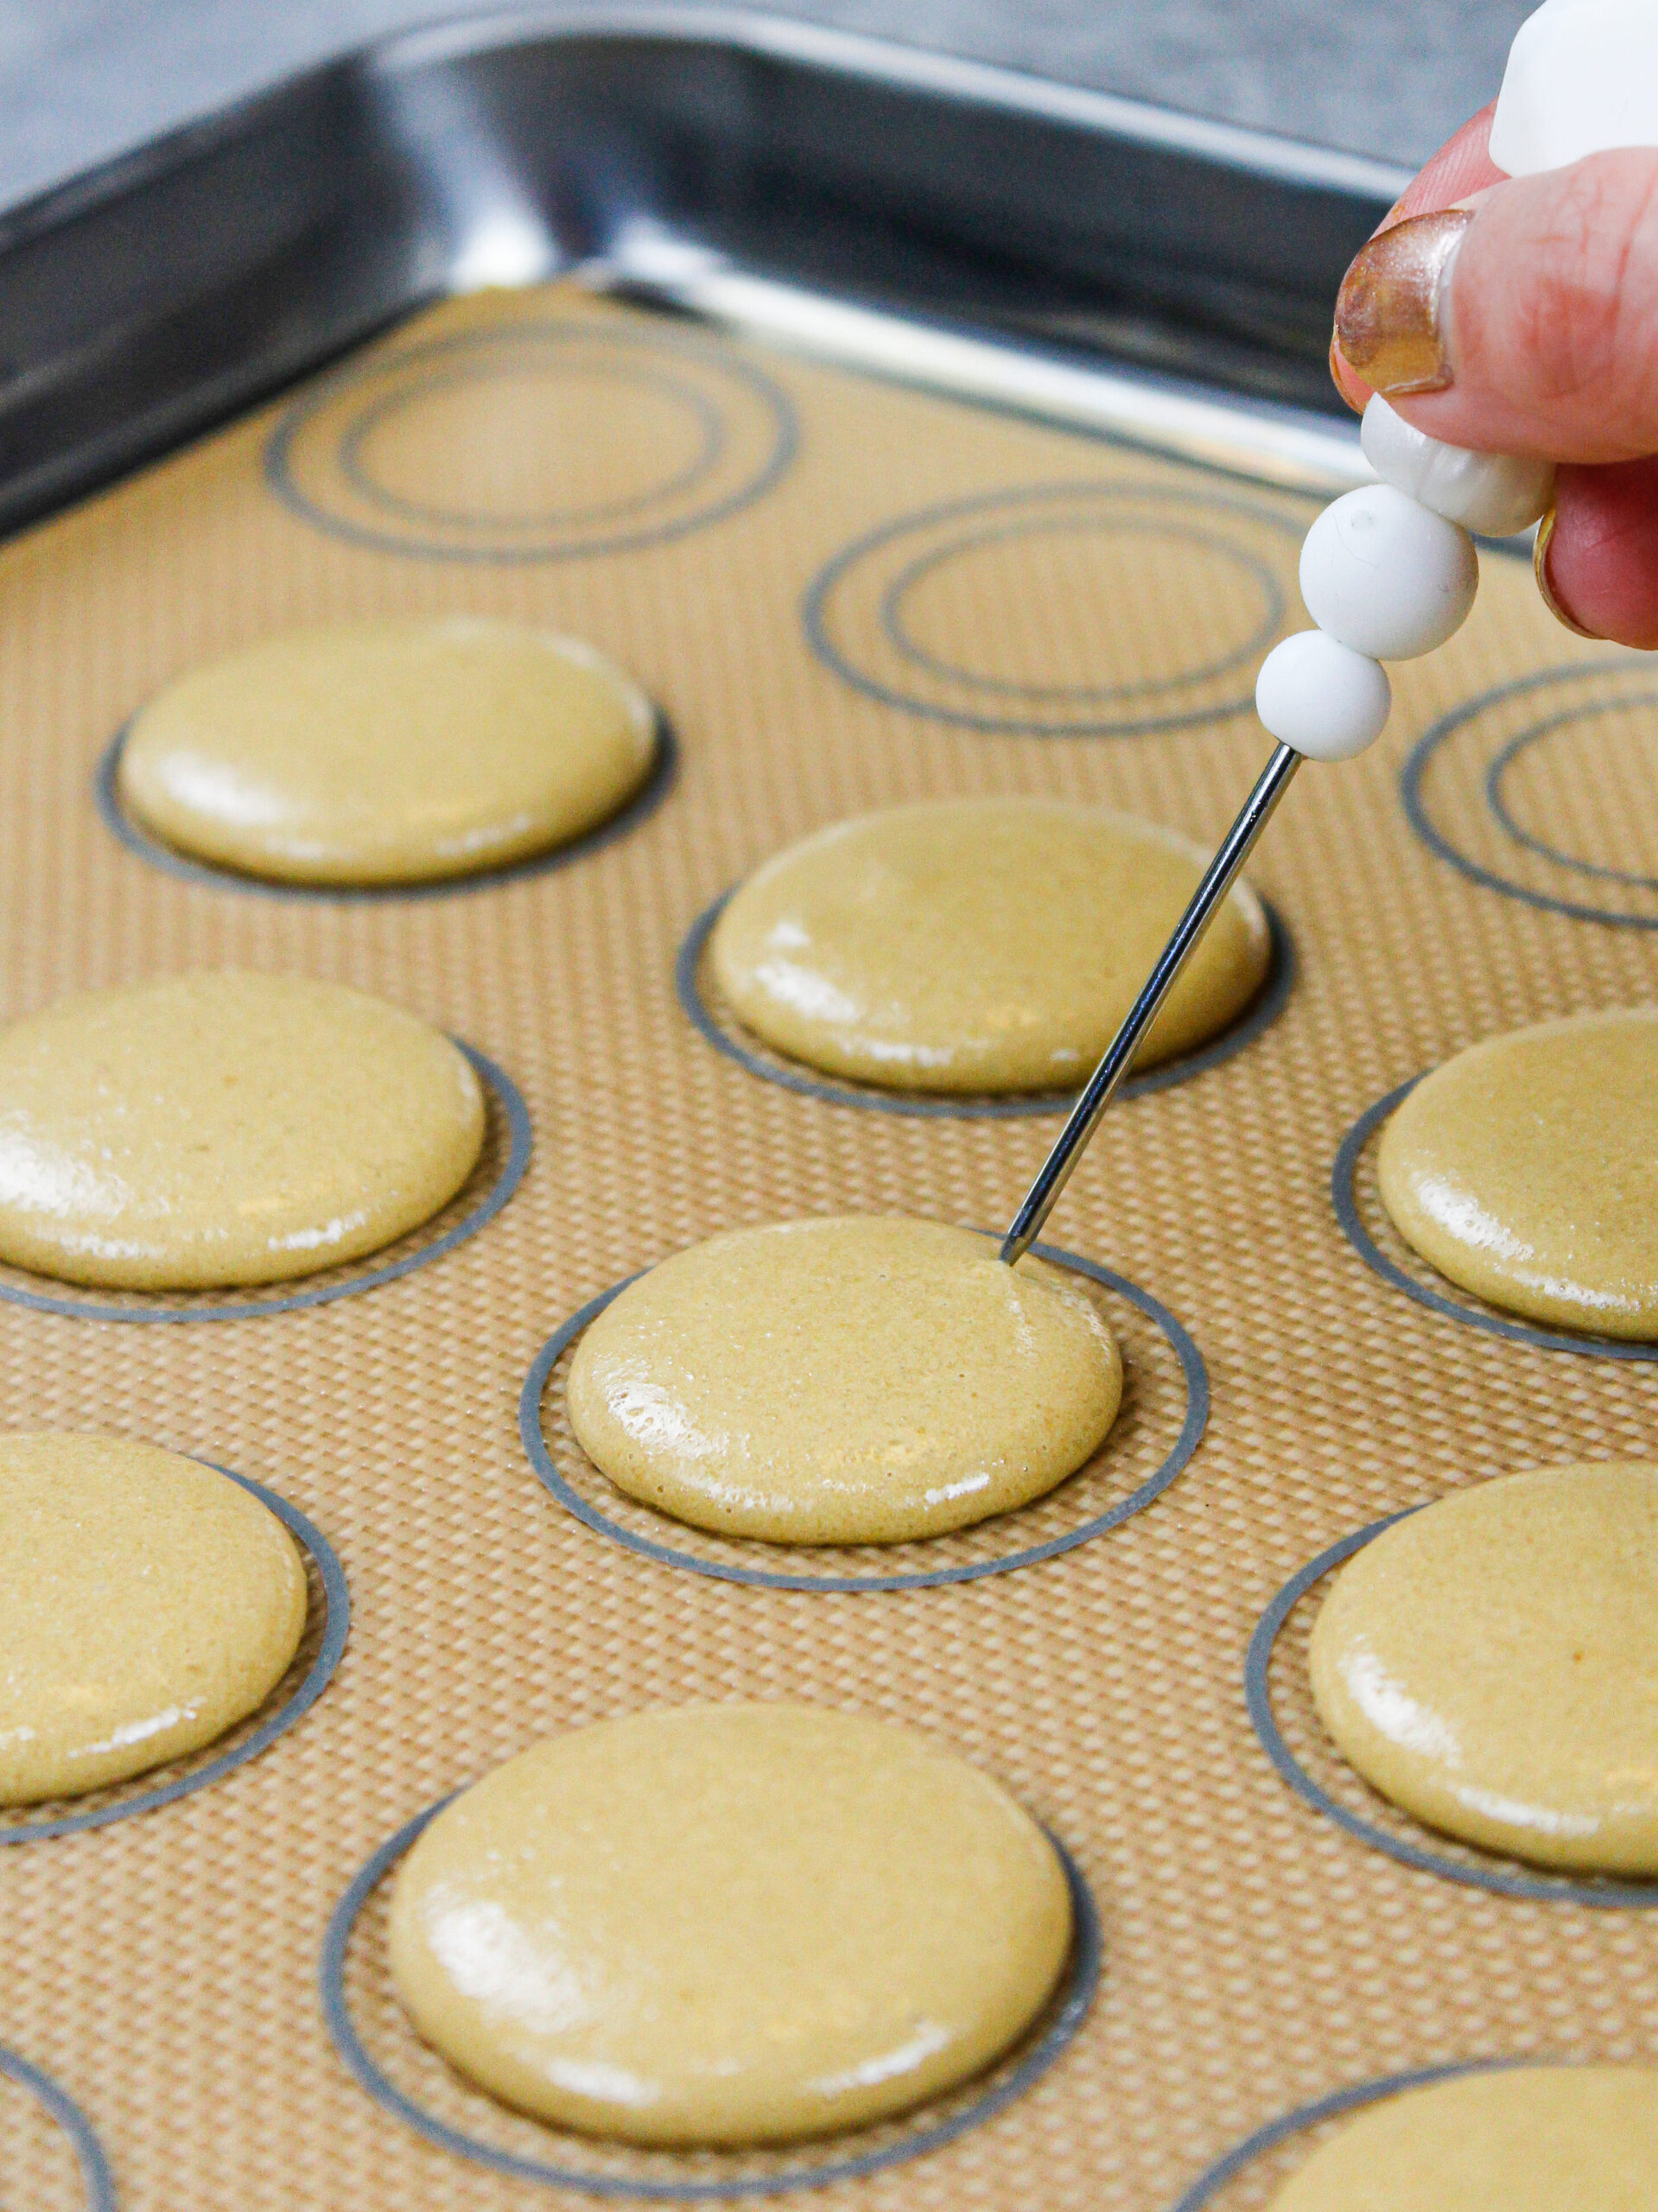 image of coffee macaron shells that have been piped and banged on a counter to release any air bubbles, which are being popped with a scribe